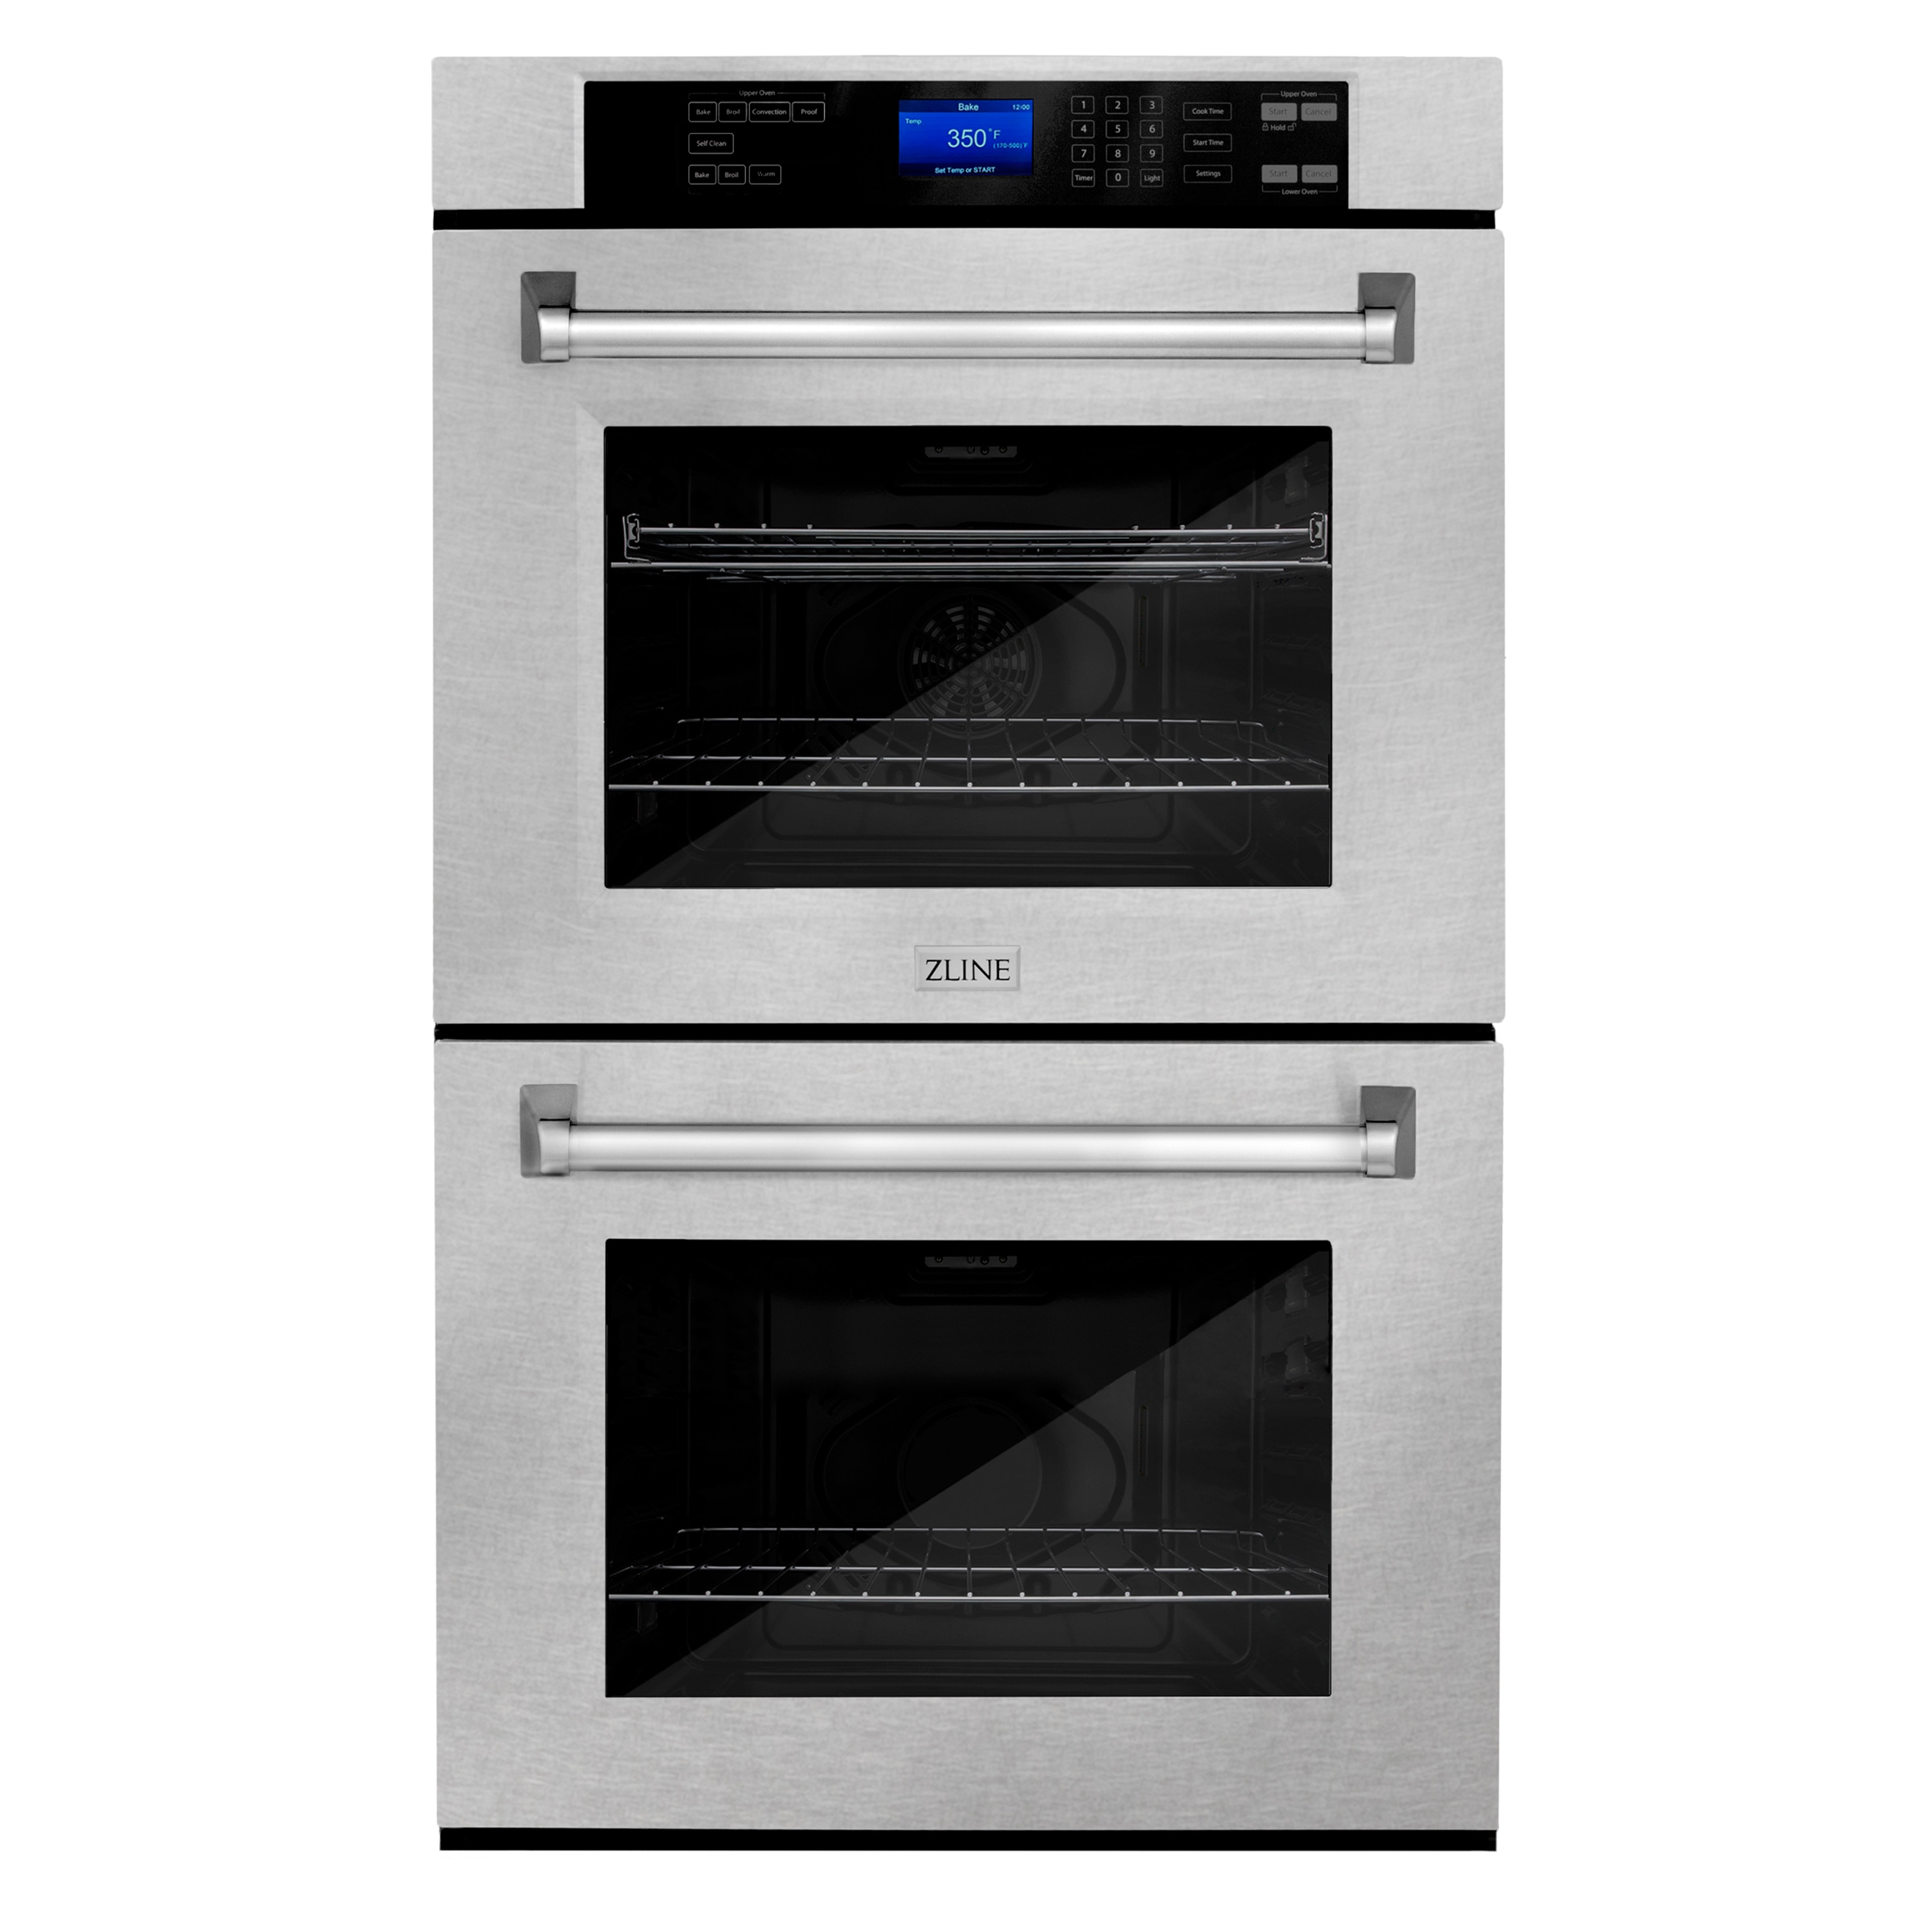 ZLINE KITCHEN & BATH 30-in Self-cleaning Single-fan European Double Electric Wall Oven (Fingerprint Resistant Stainless Steel) in the Double Wall Ovens department at Lowes.com